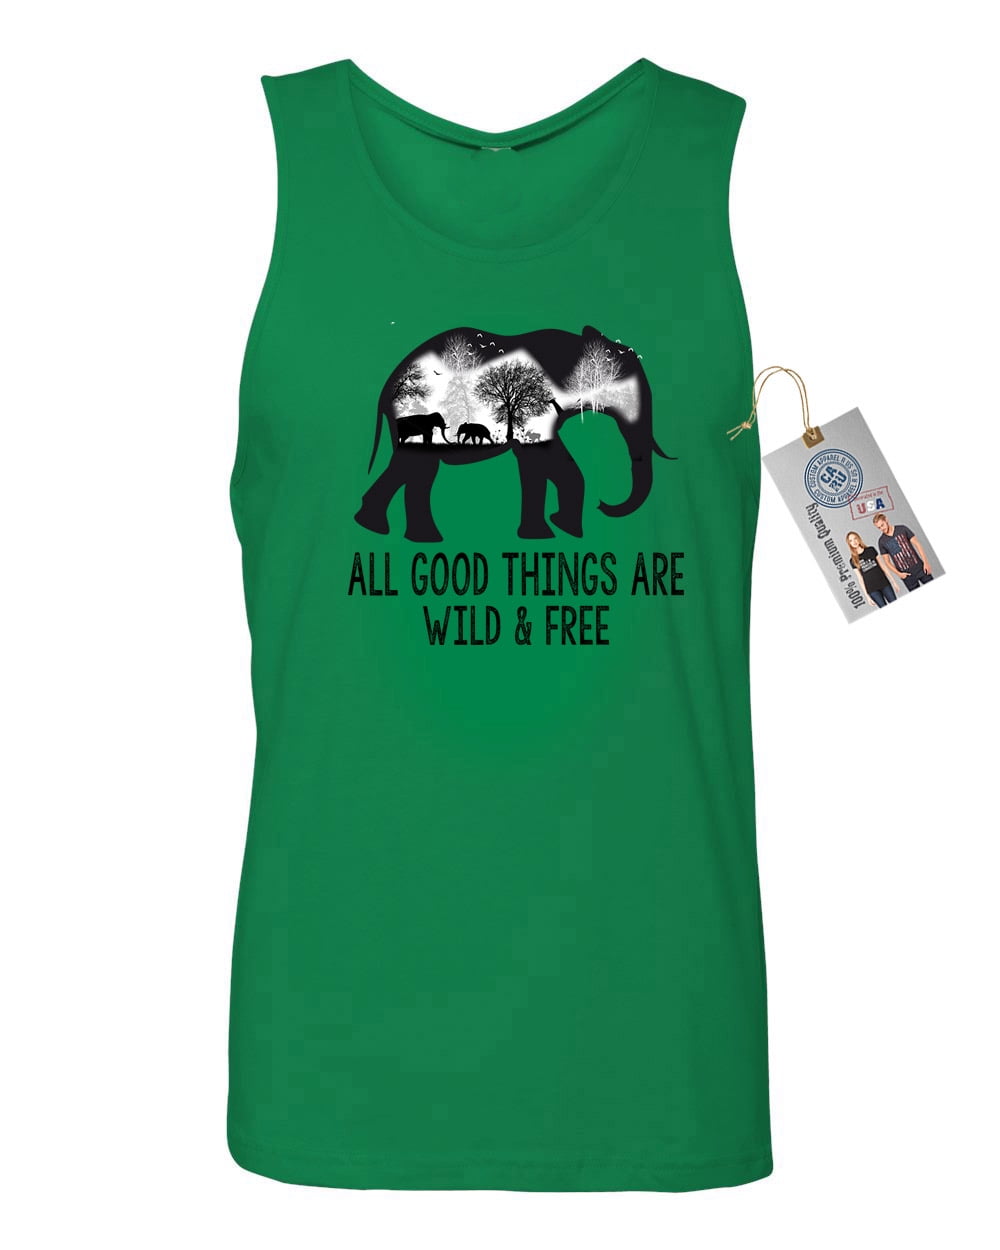 Men's Tank Top Created Using the Words Wild and Free